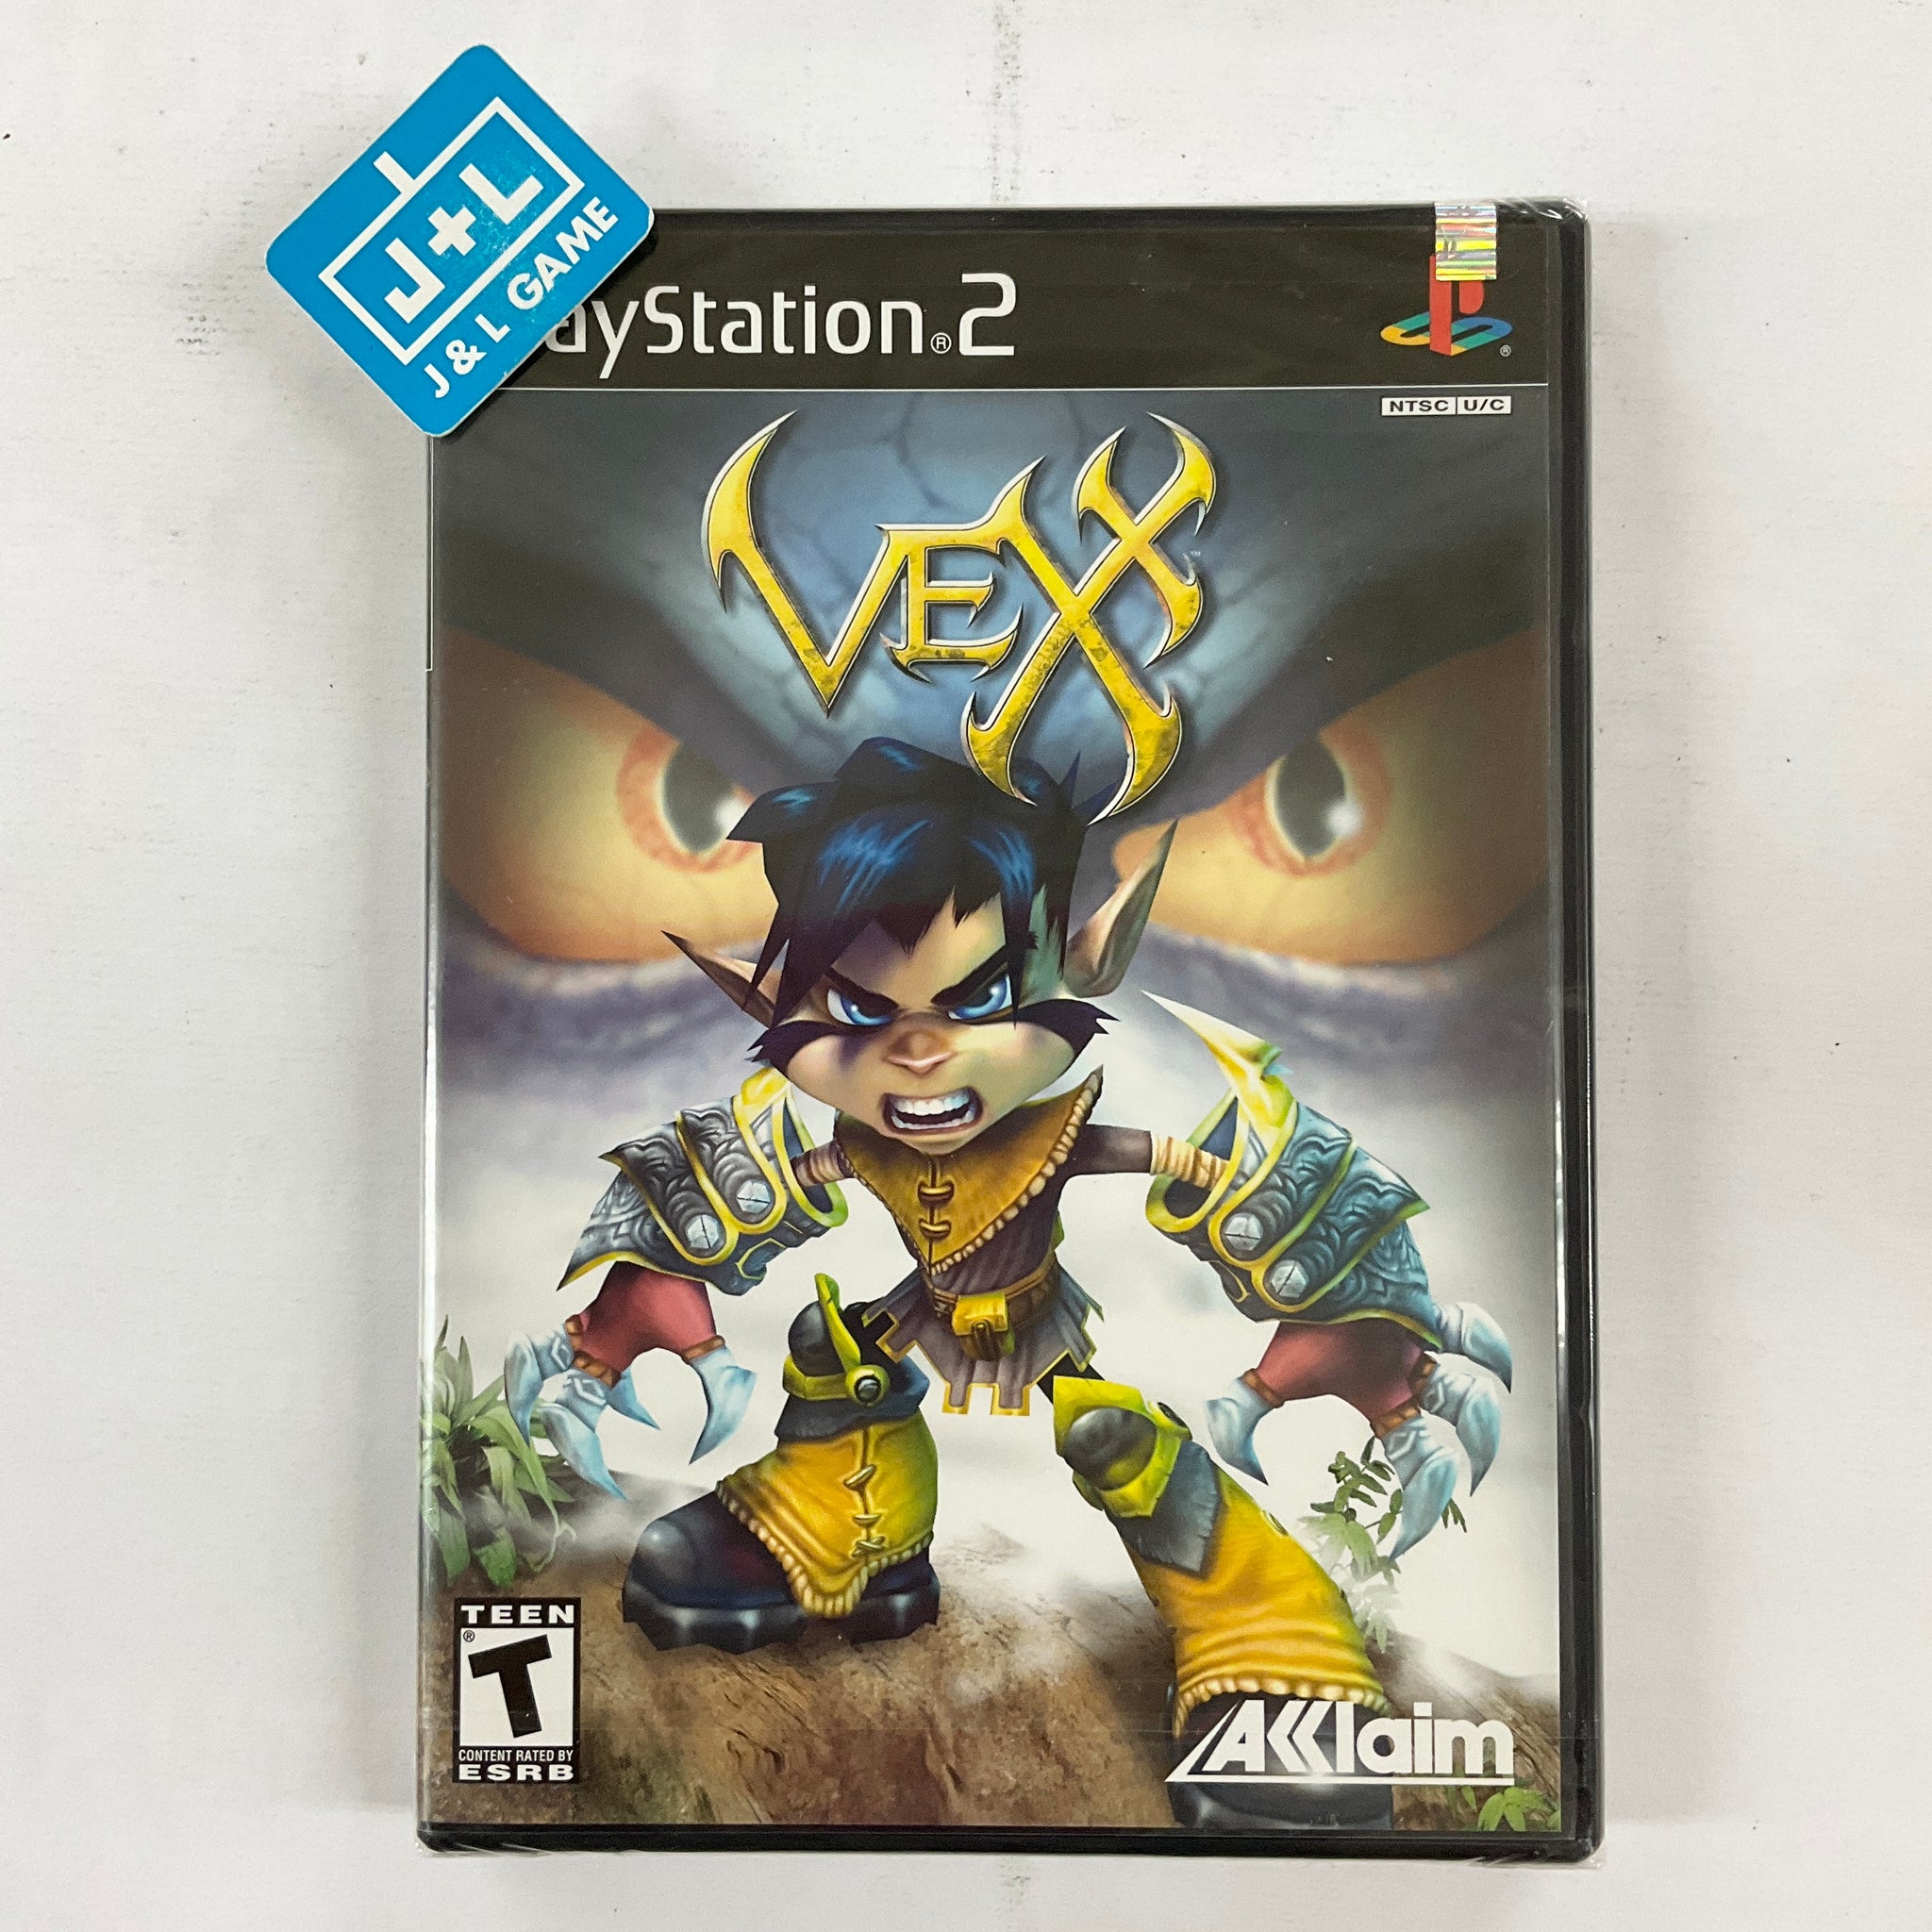 Vexx - (PS2) PlayStation 2 Video Games Acclaim   